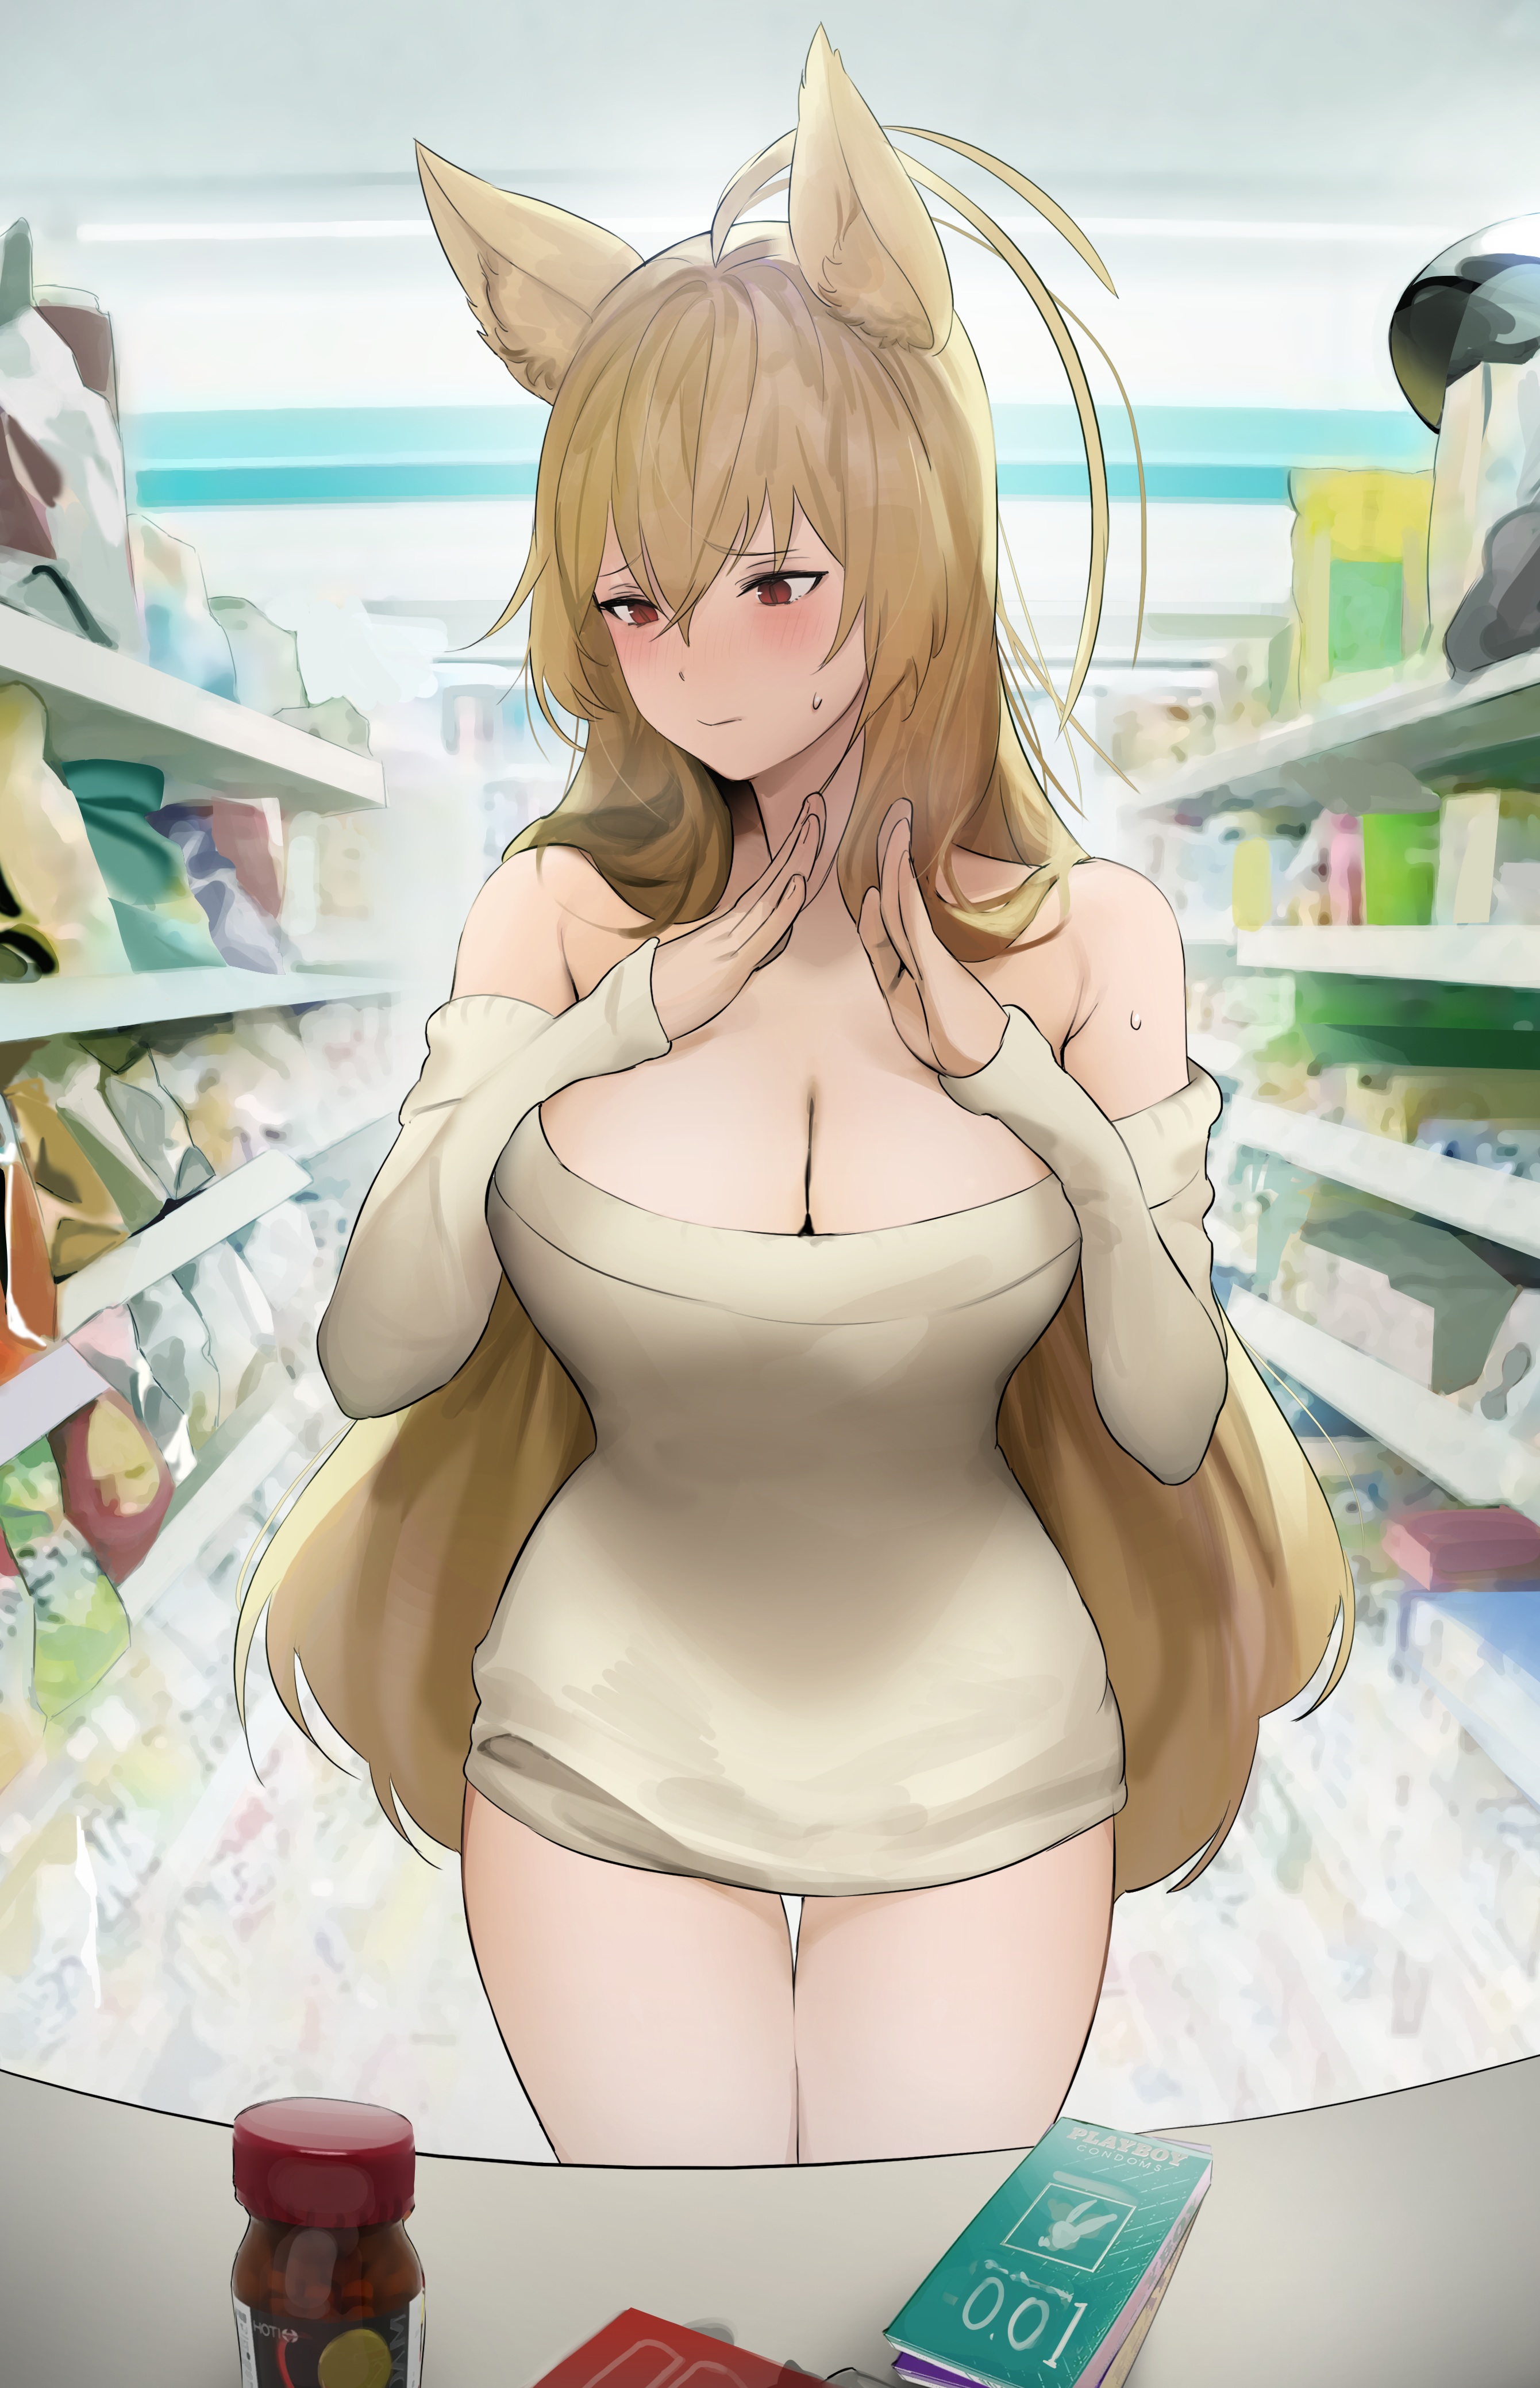 Anime 2680x4155 anime anime girls frontal view animal ears blonde long hair red eyes blushing cleavage big boobs artwork UTHY Dungeon and Fighter condom stores